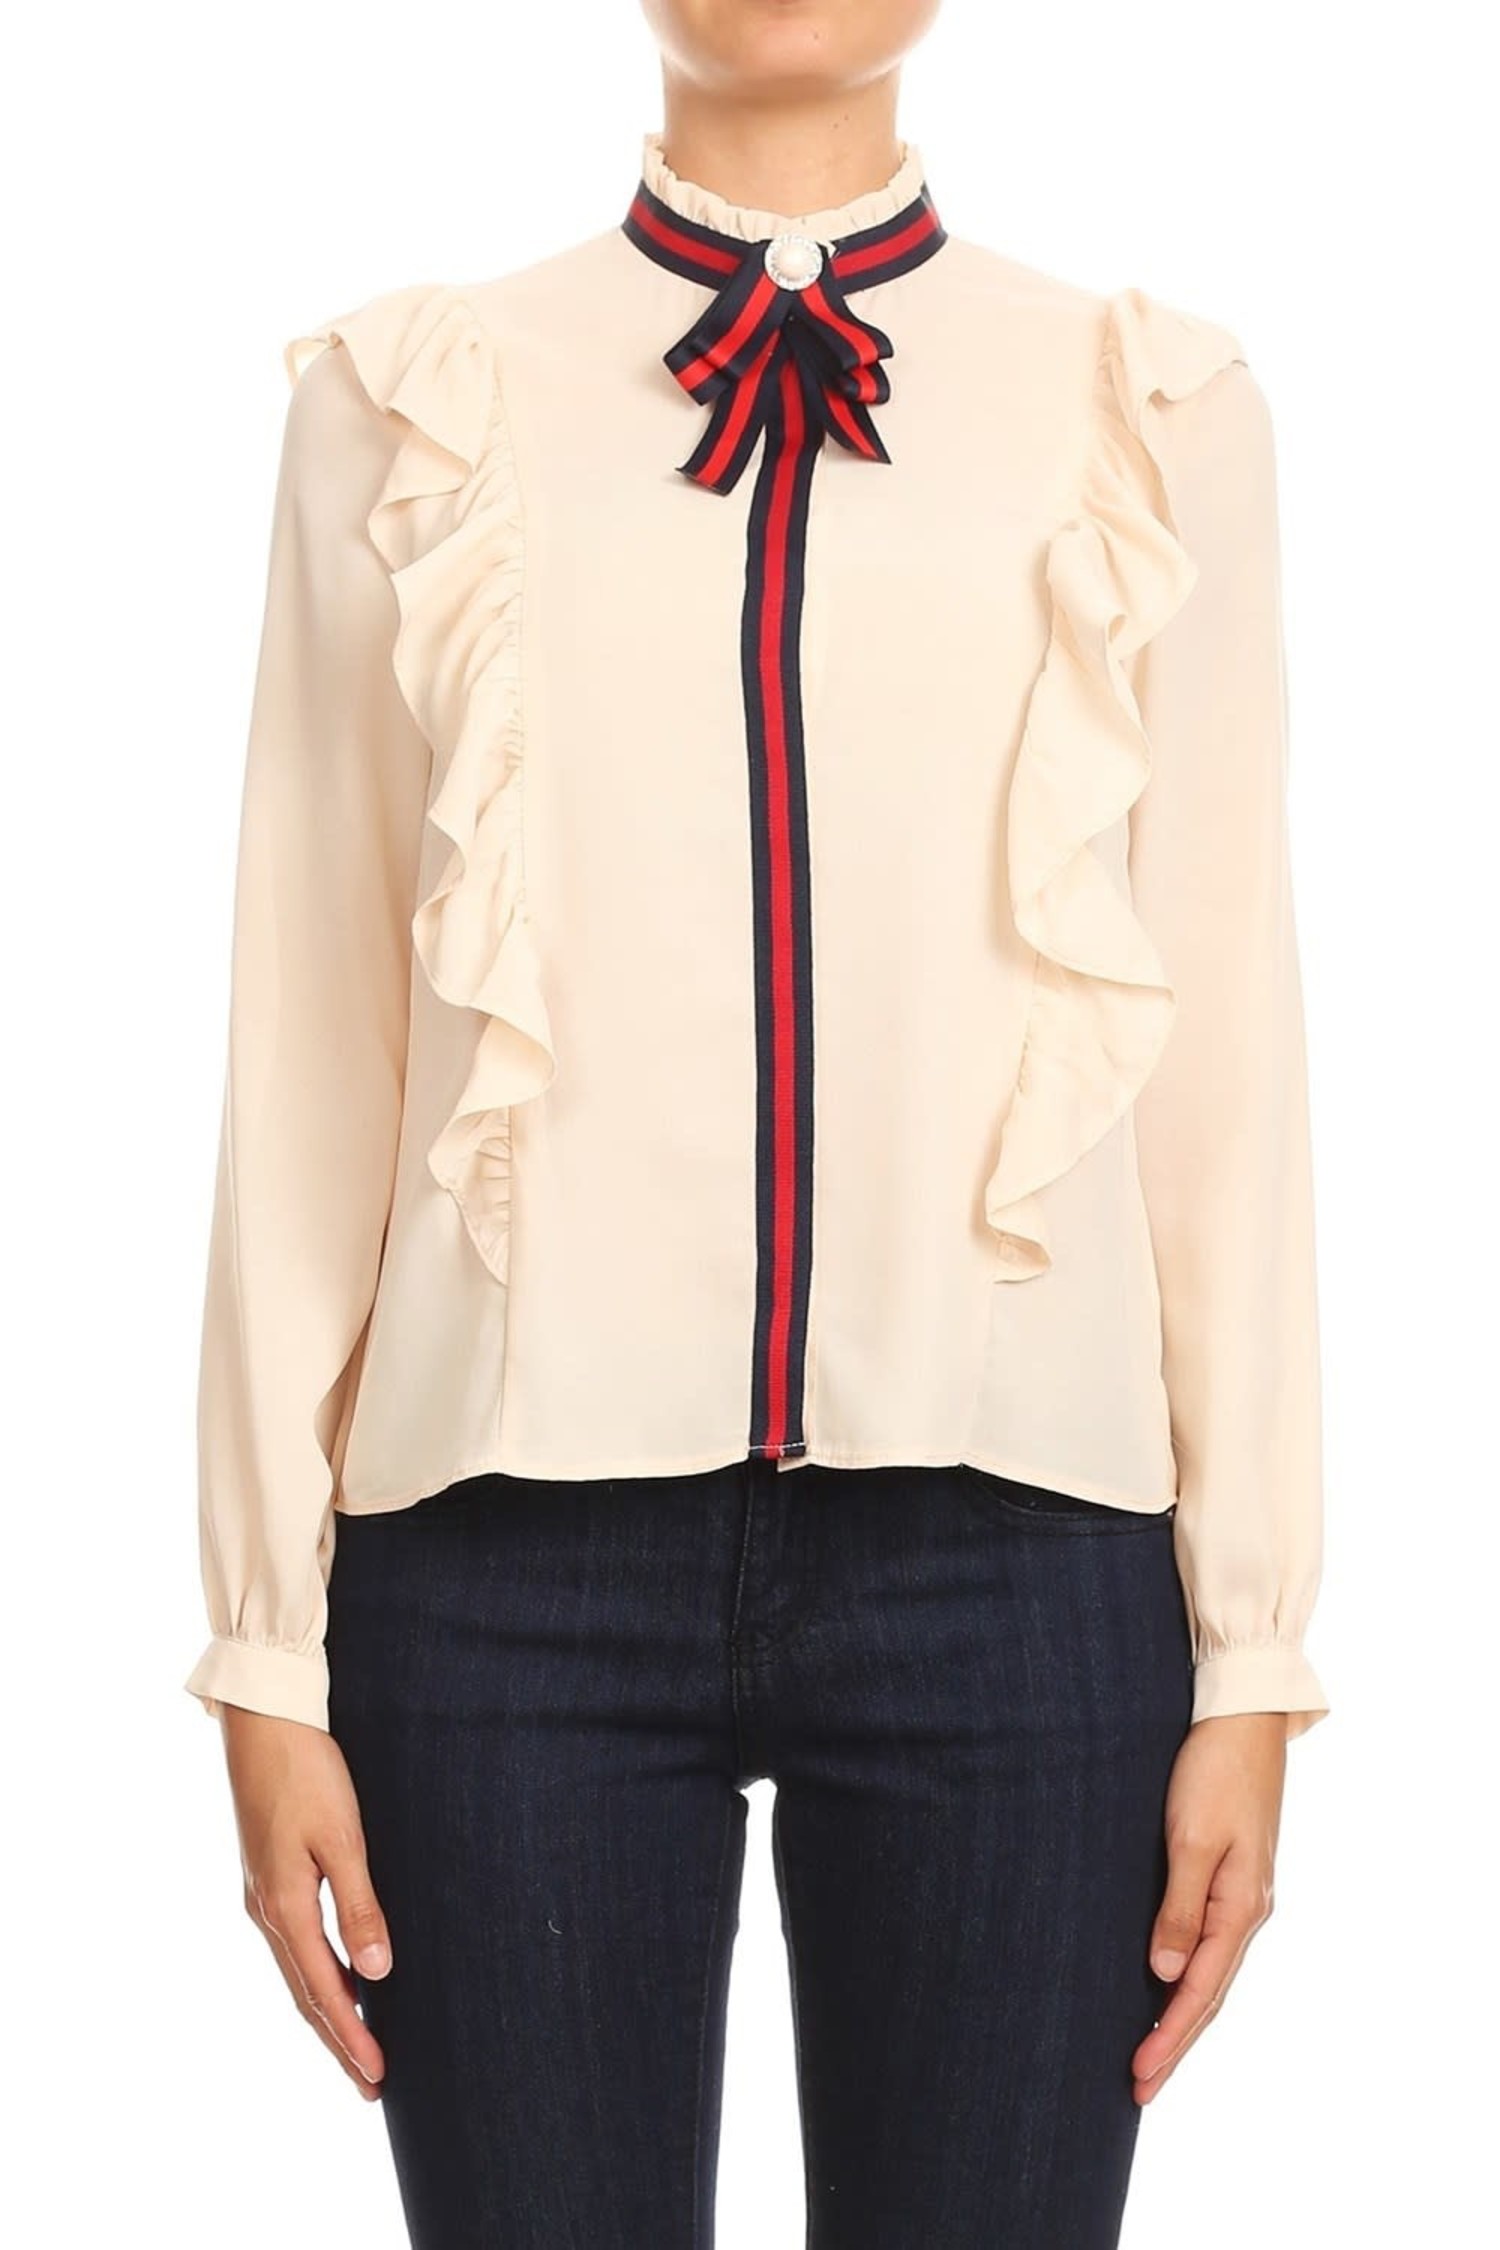 gucci inspired blouse